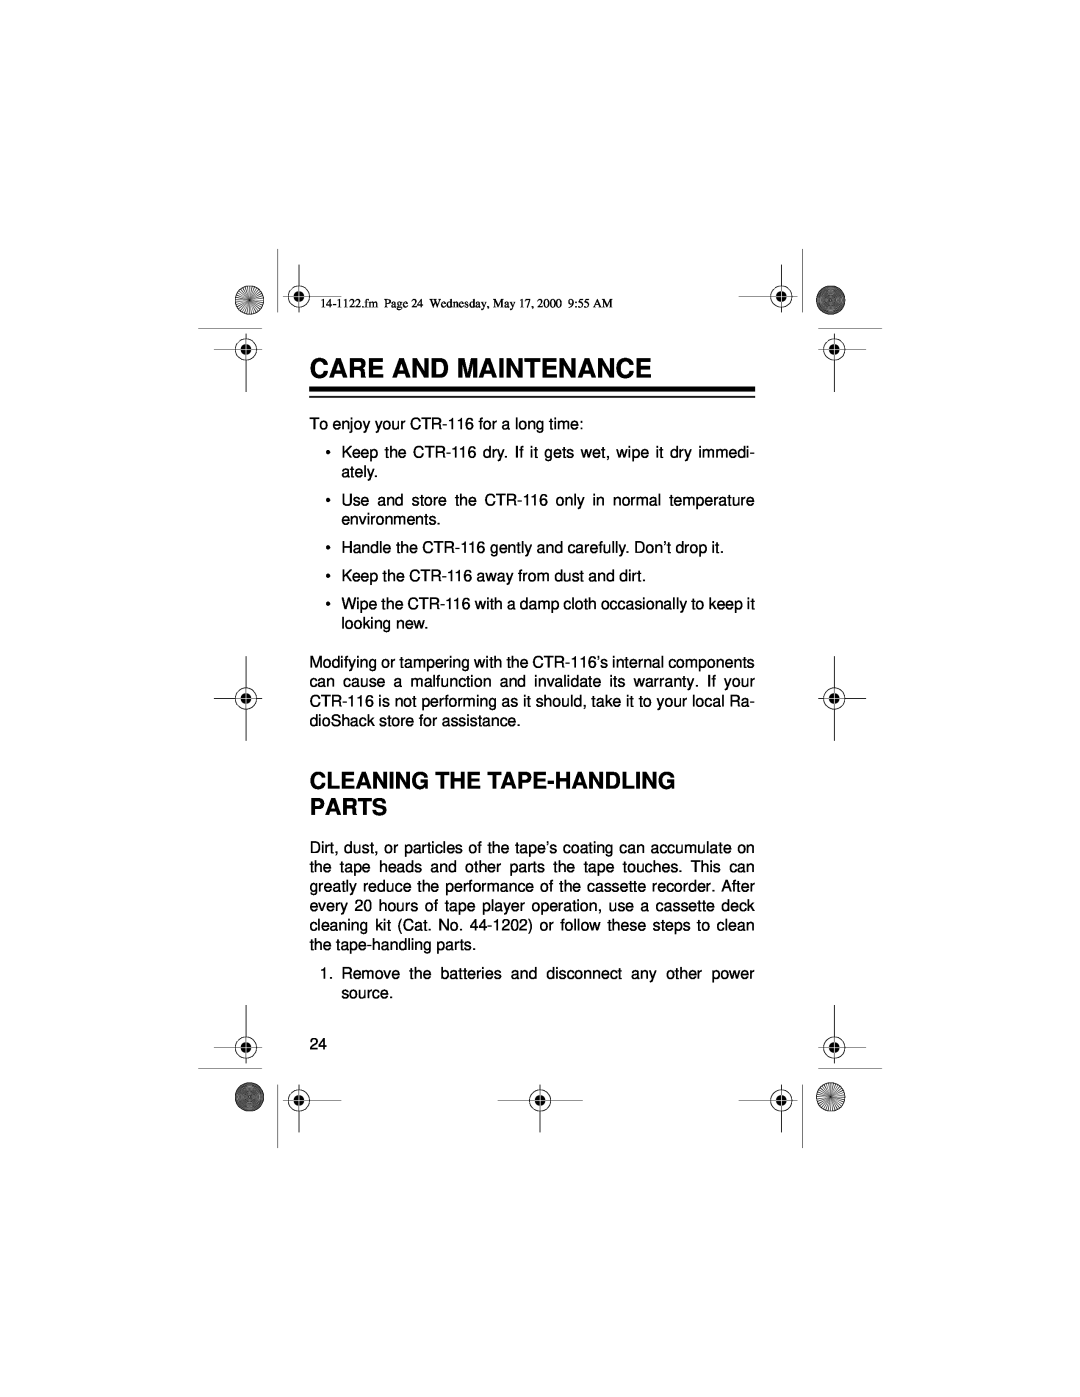 Optimus CTR-116 owner manual Care And Maintenance, Cleaning The Tape-Handlingparts 